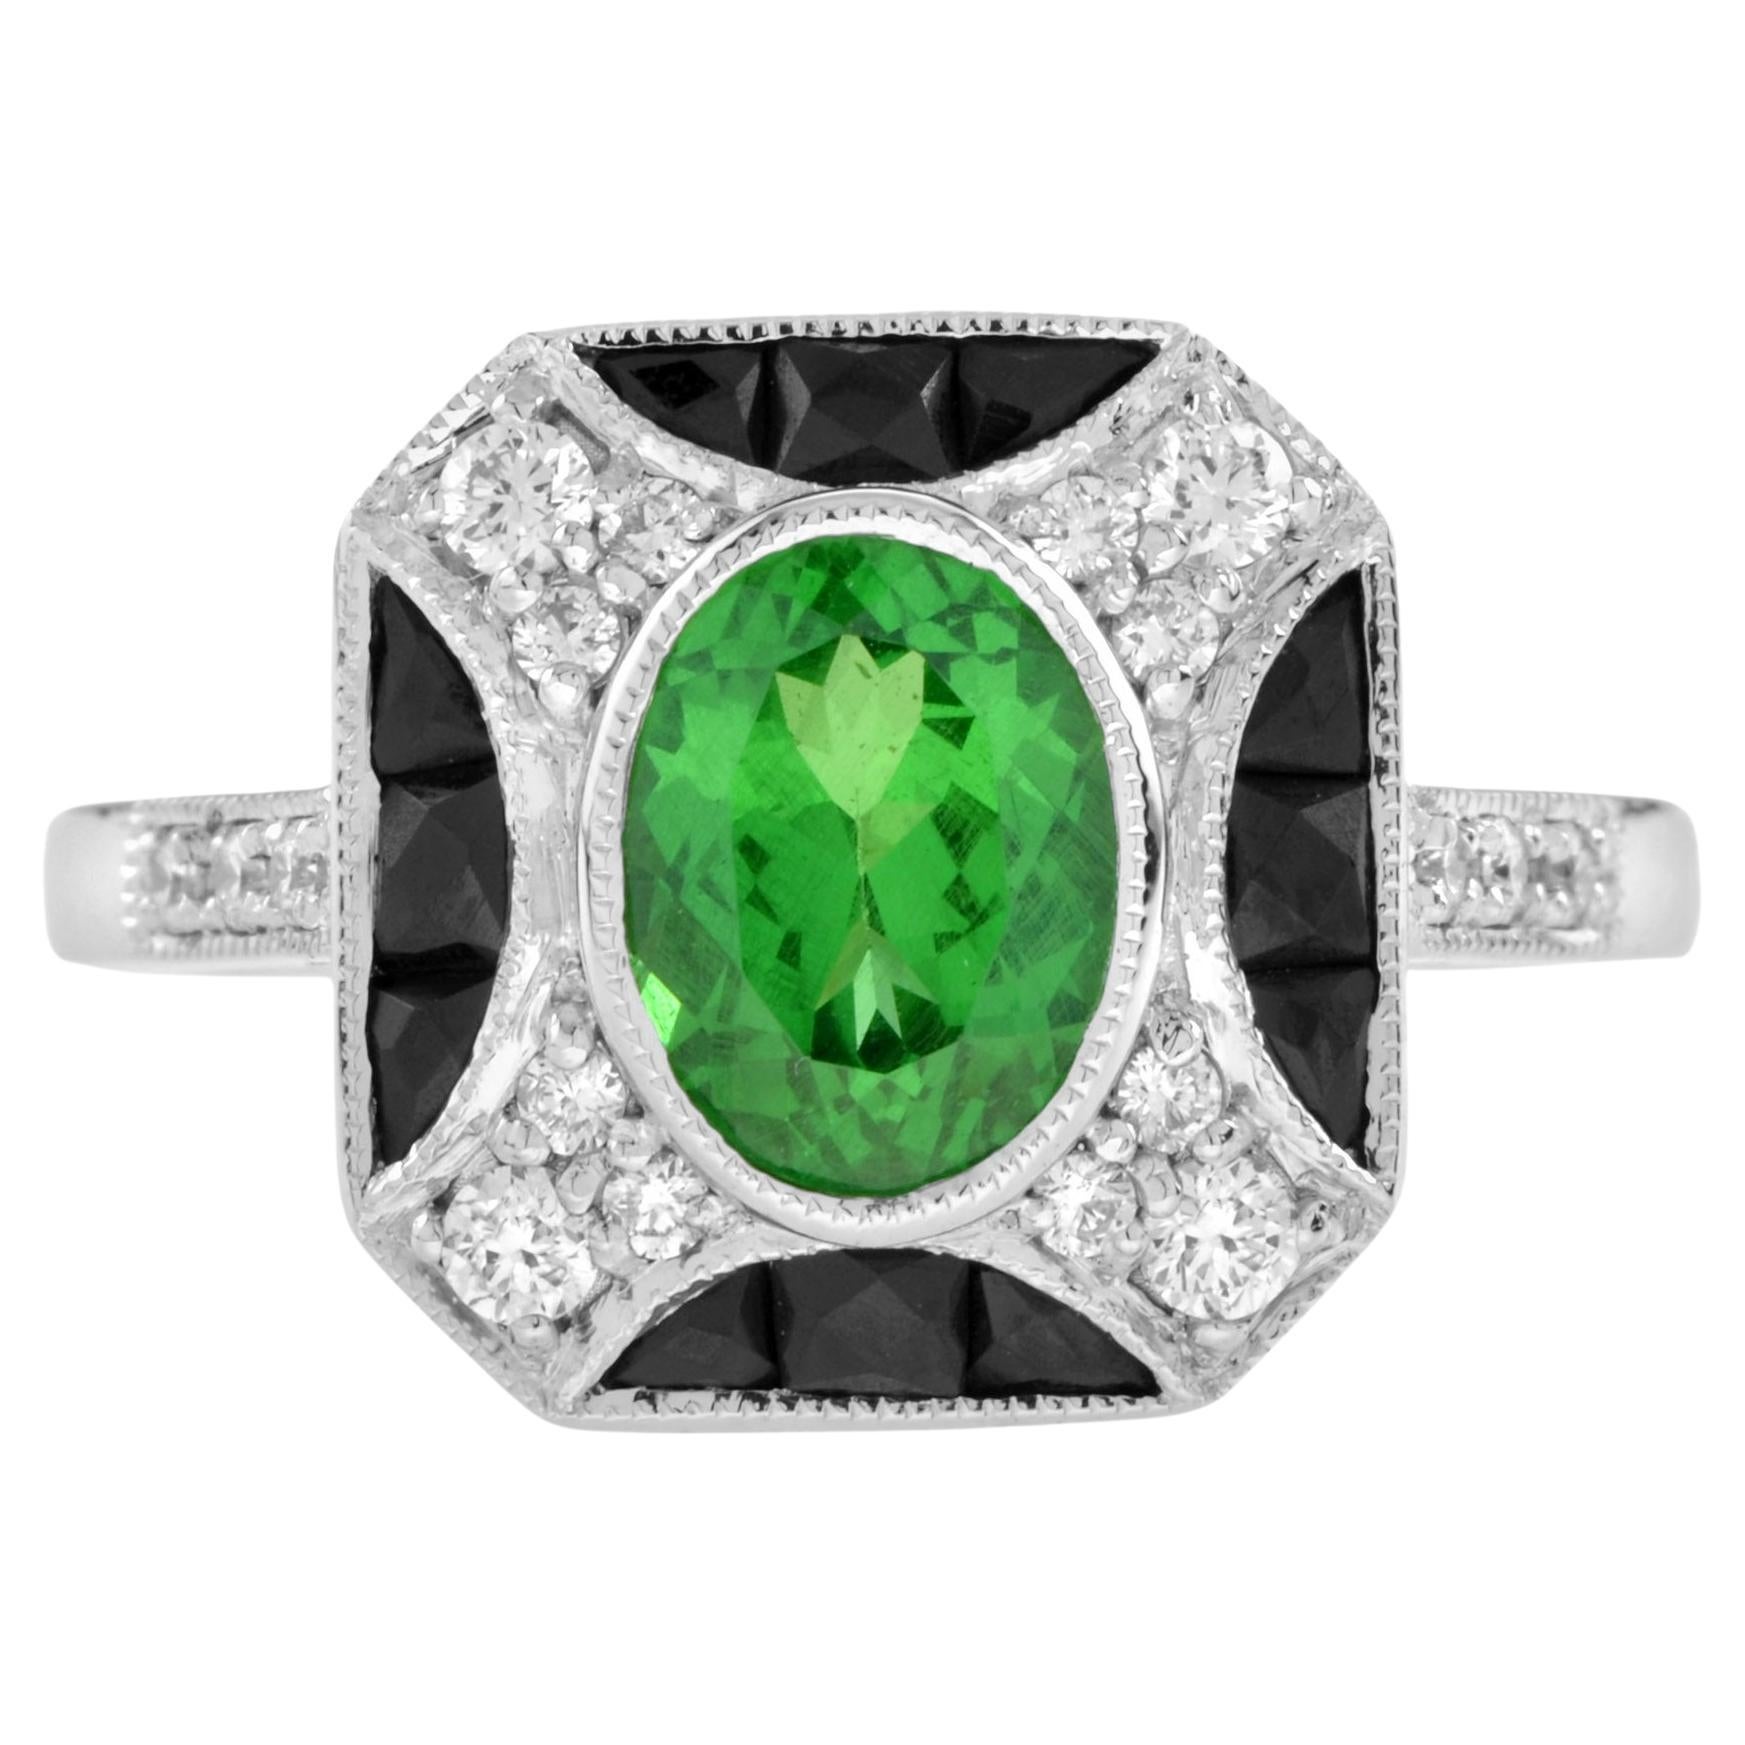 Tsavorite with Diamond and Onyx Accent Art Deco Style Ring in 14k White Gold